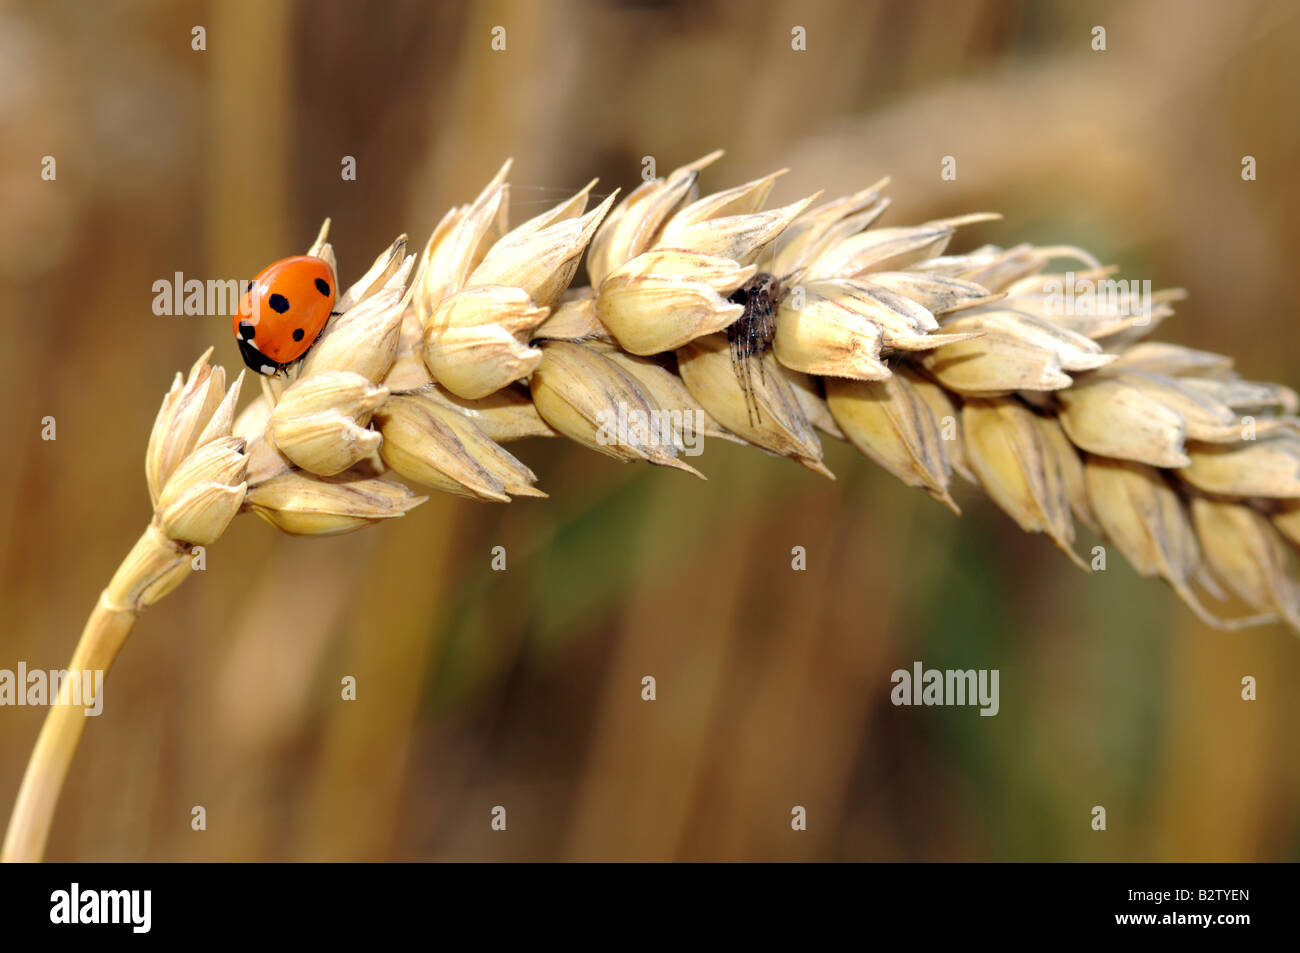 a spider hunting a ladybird on a wheat chaff Stock Photo